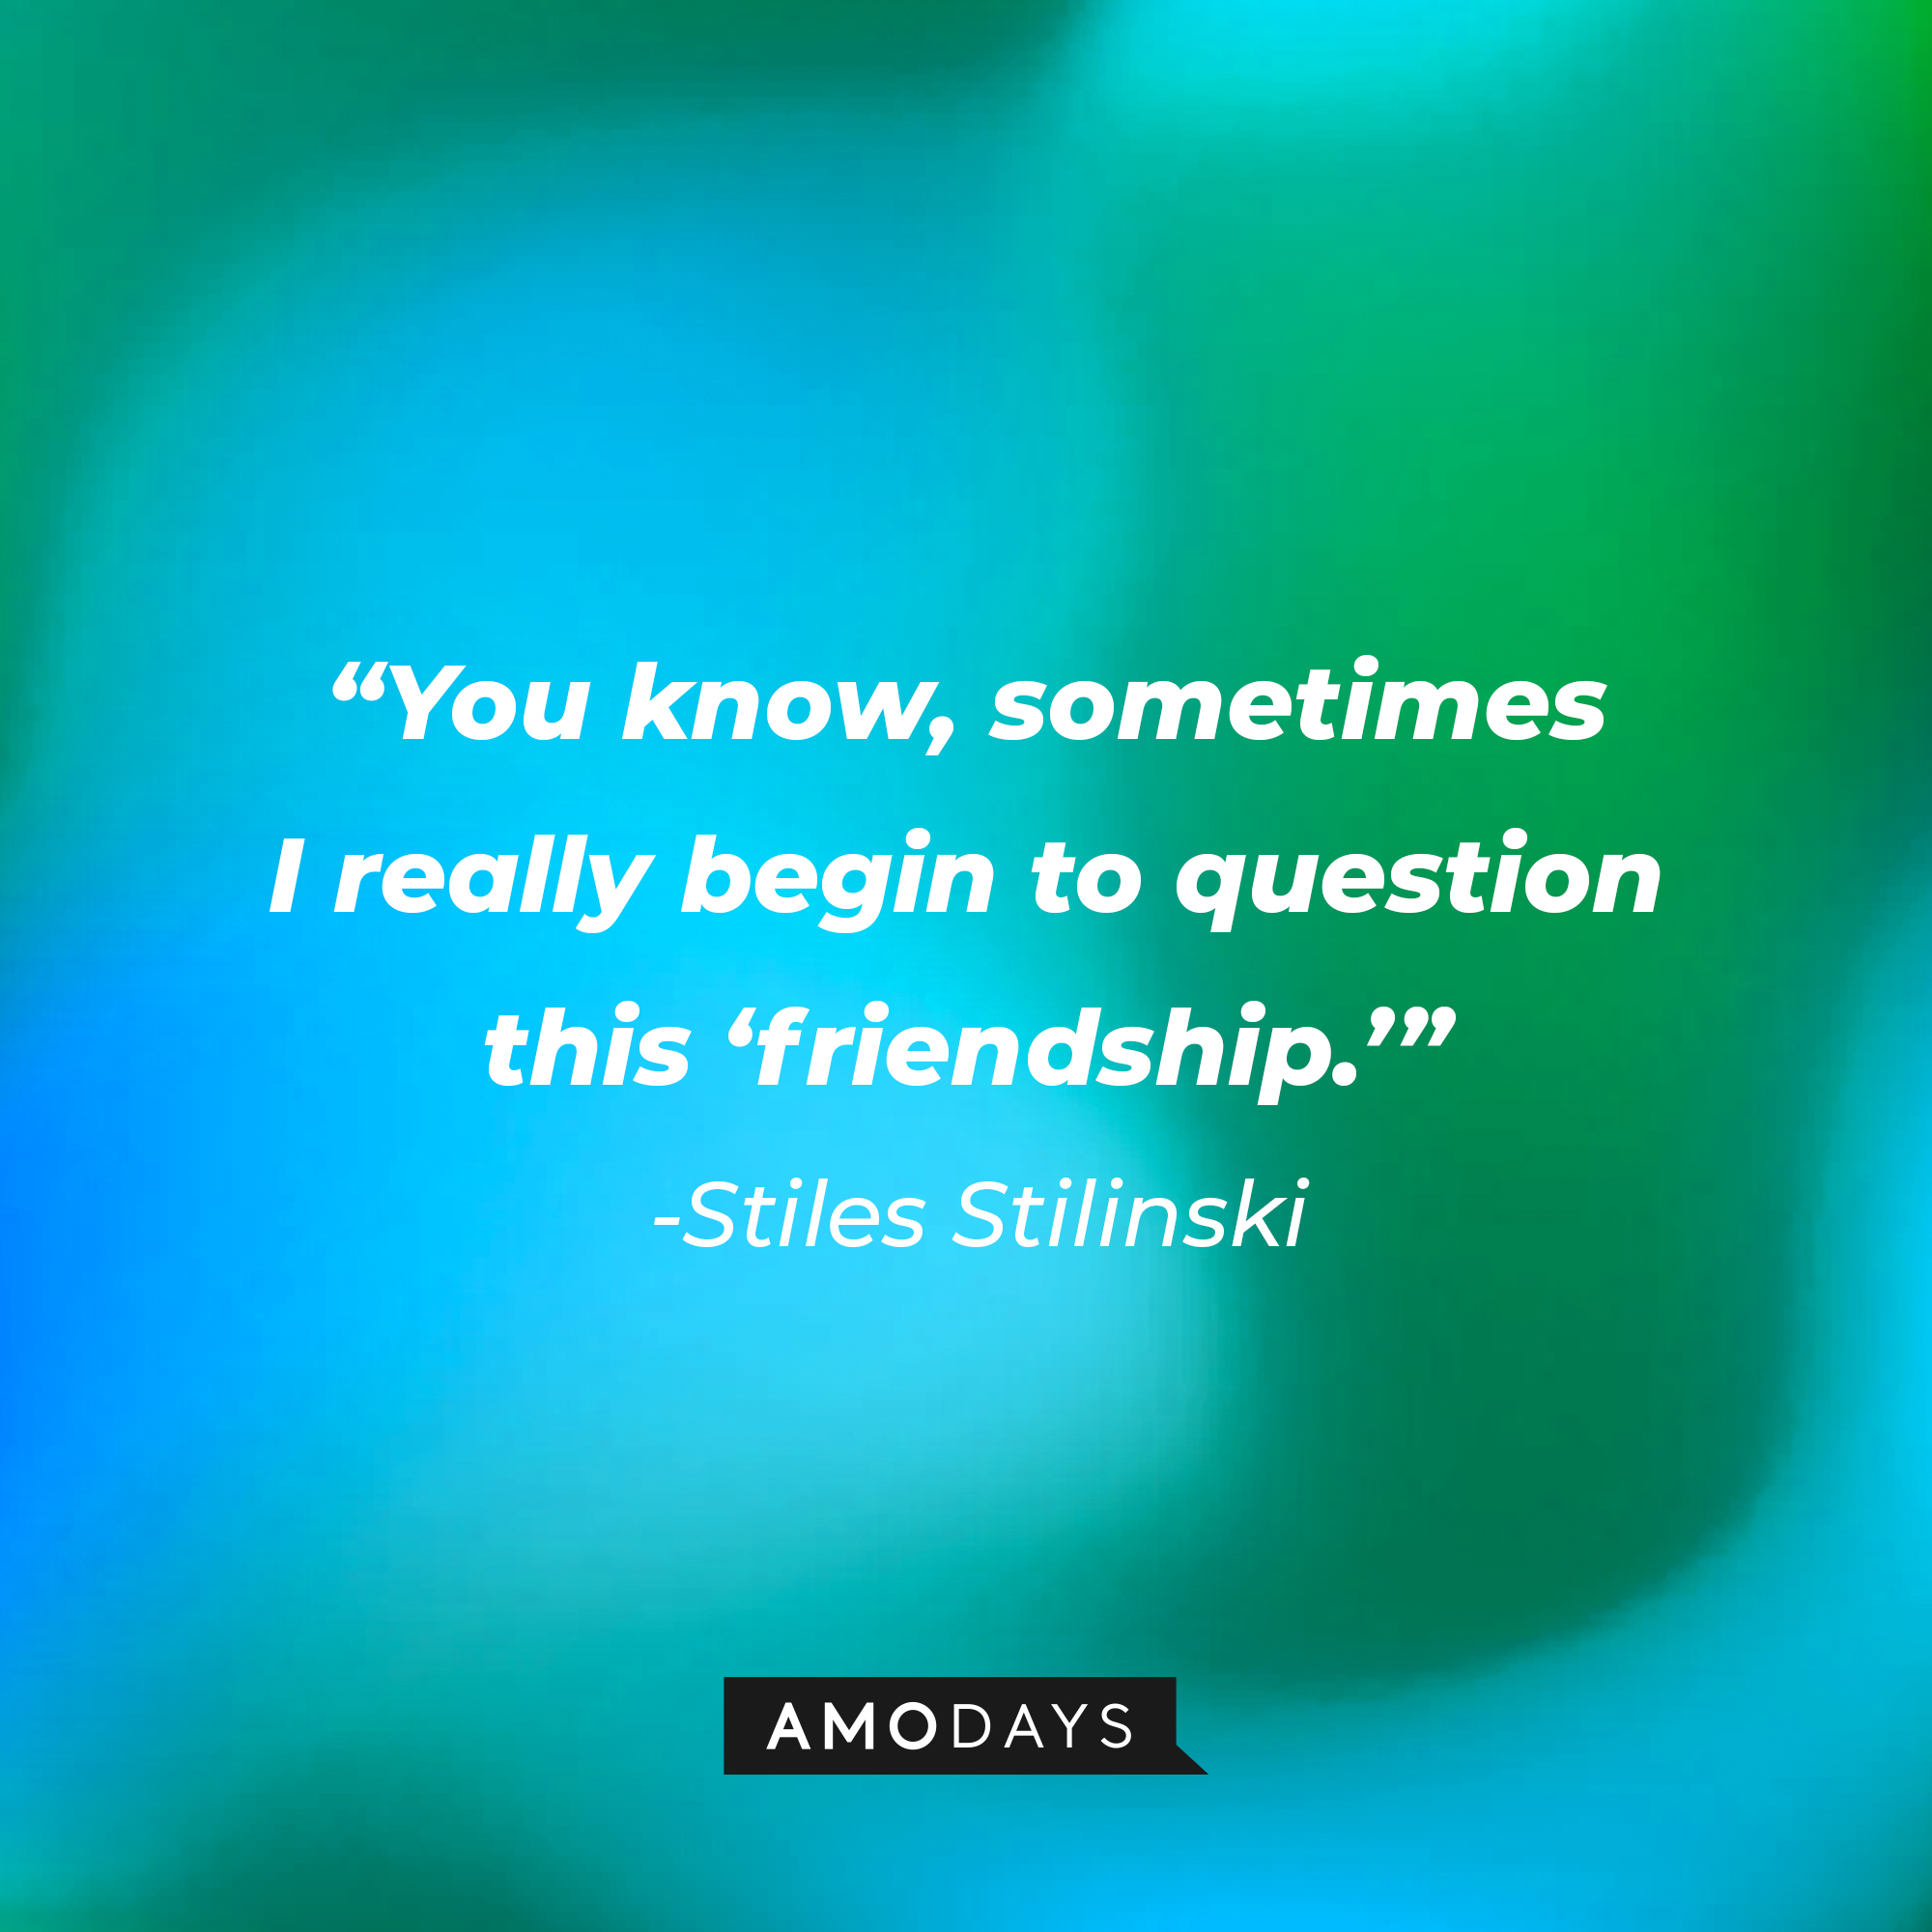 Stiles Stilinski's quote: "You know, sometimes I really begin to question this 'friendship.'" | Image: AmoDays